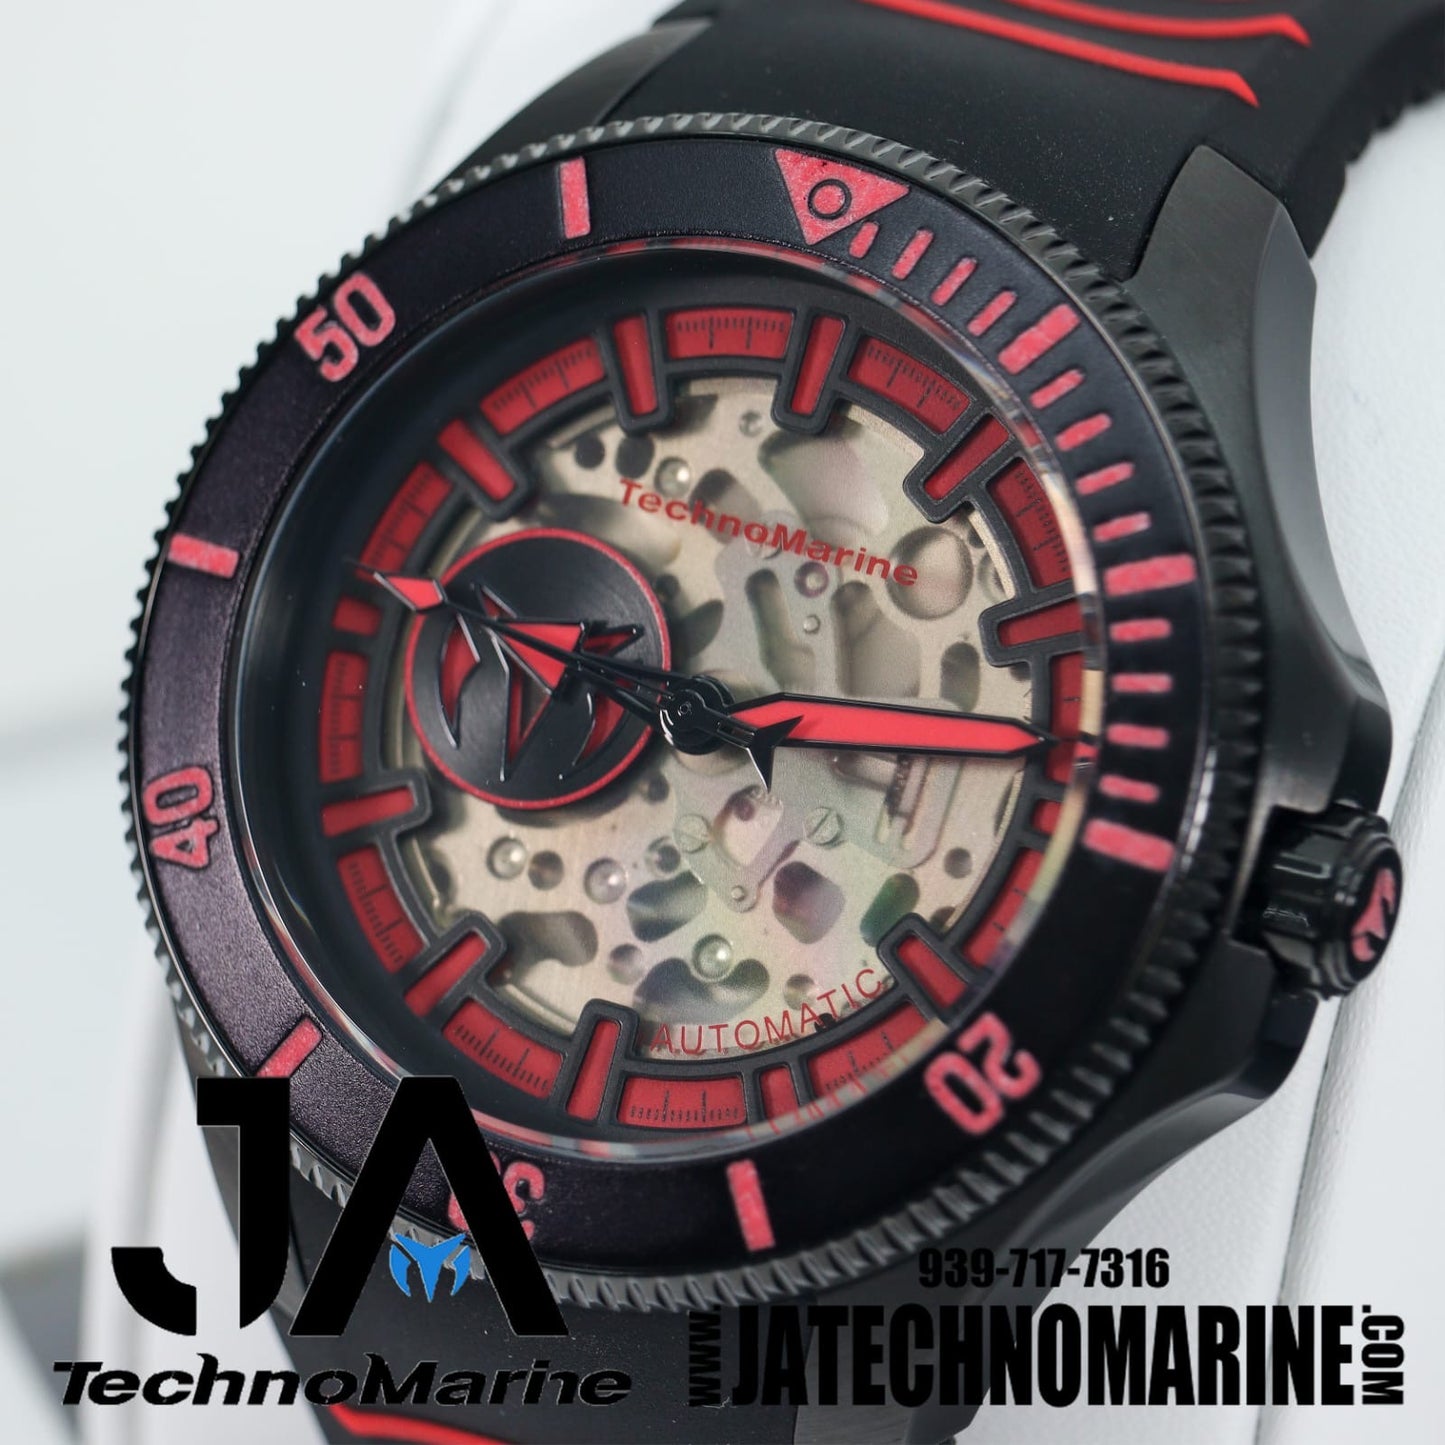 TechnoMarine Shark Cruise, Men's Watch, Stainless Steel Case, Silicone Strap, Mechanical Automatic